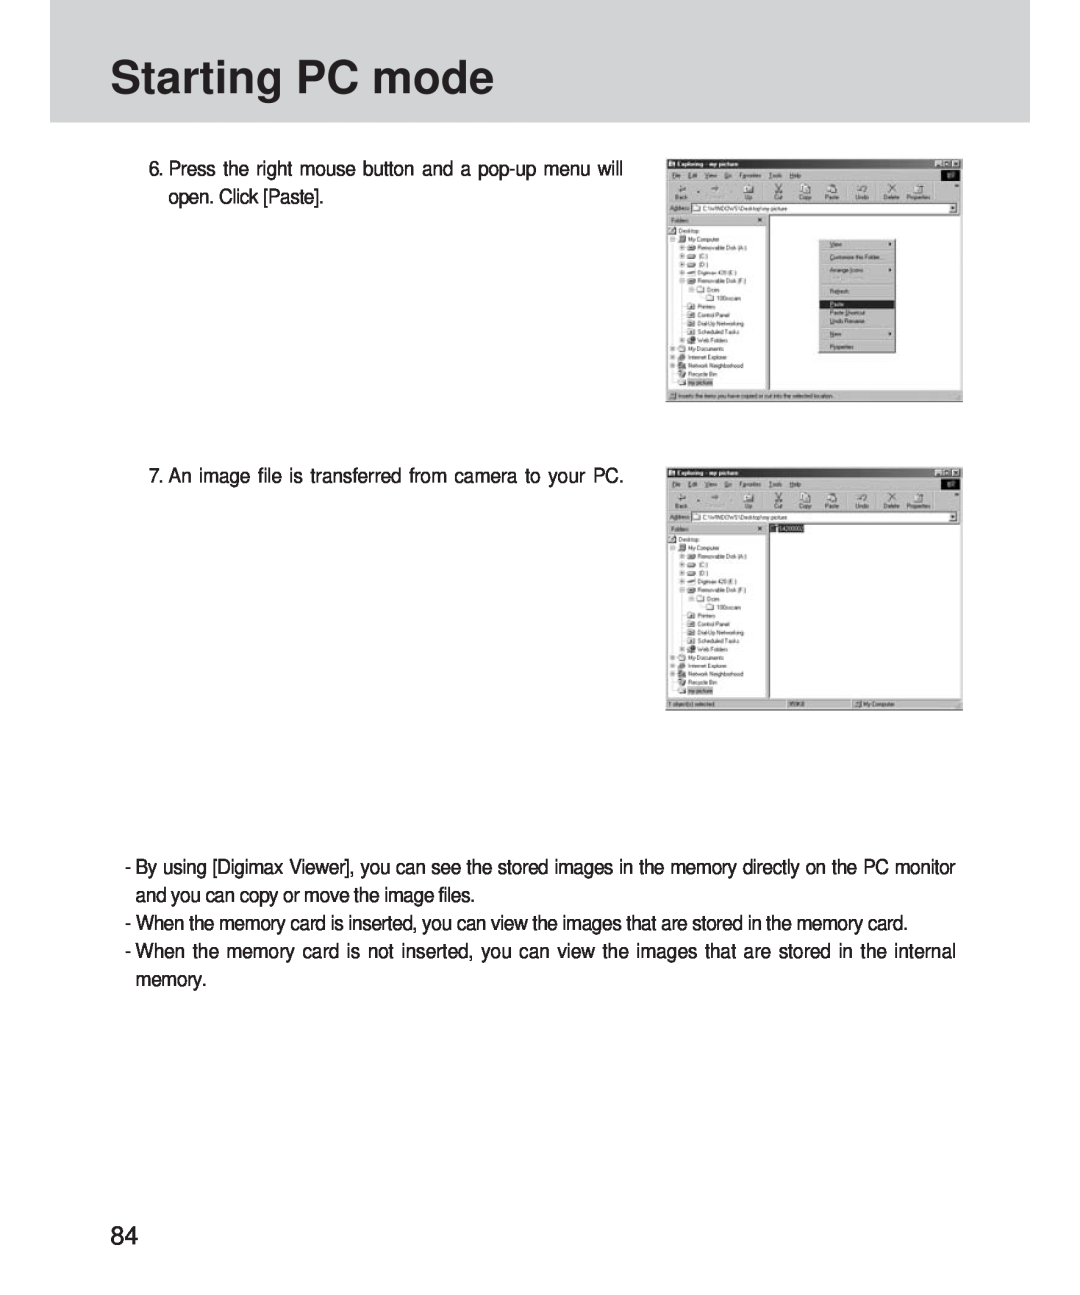 Samsung 420 manual Starting PC mode, An image file is transferred from camera to your PC 